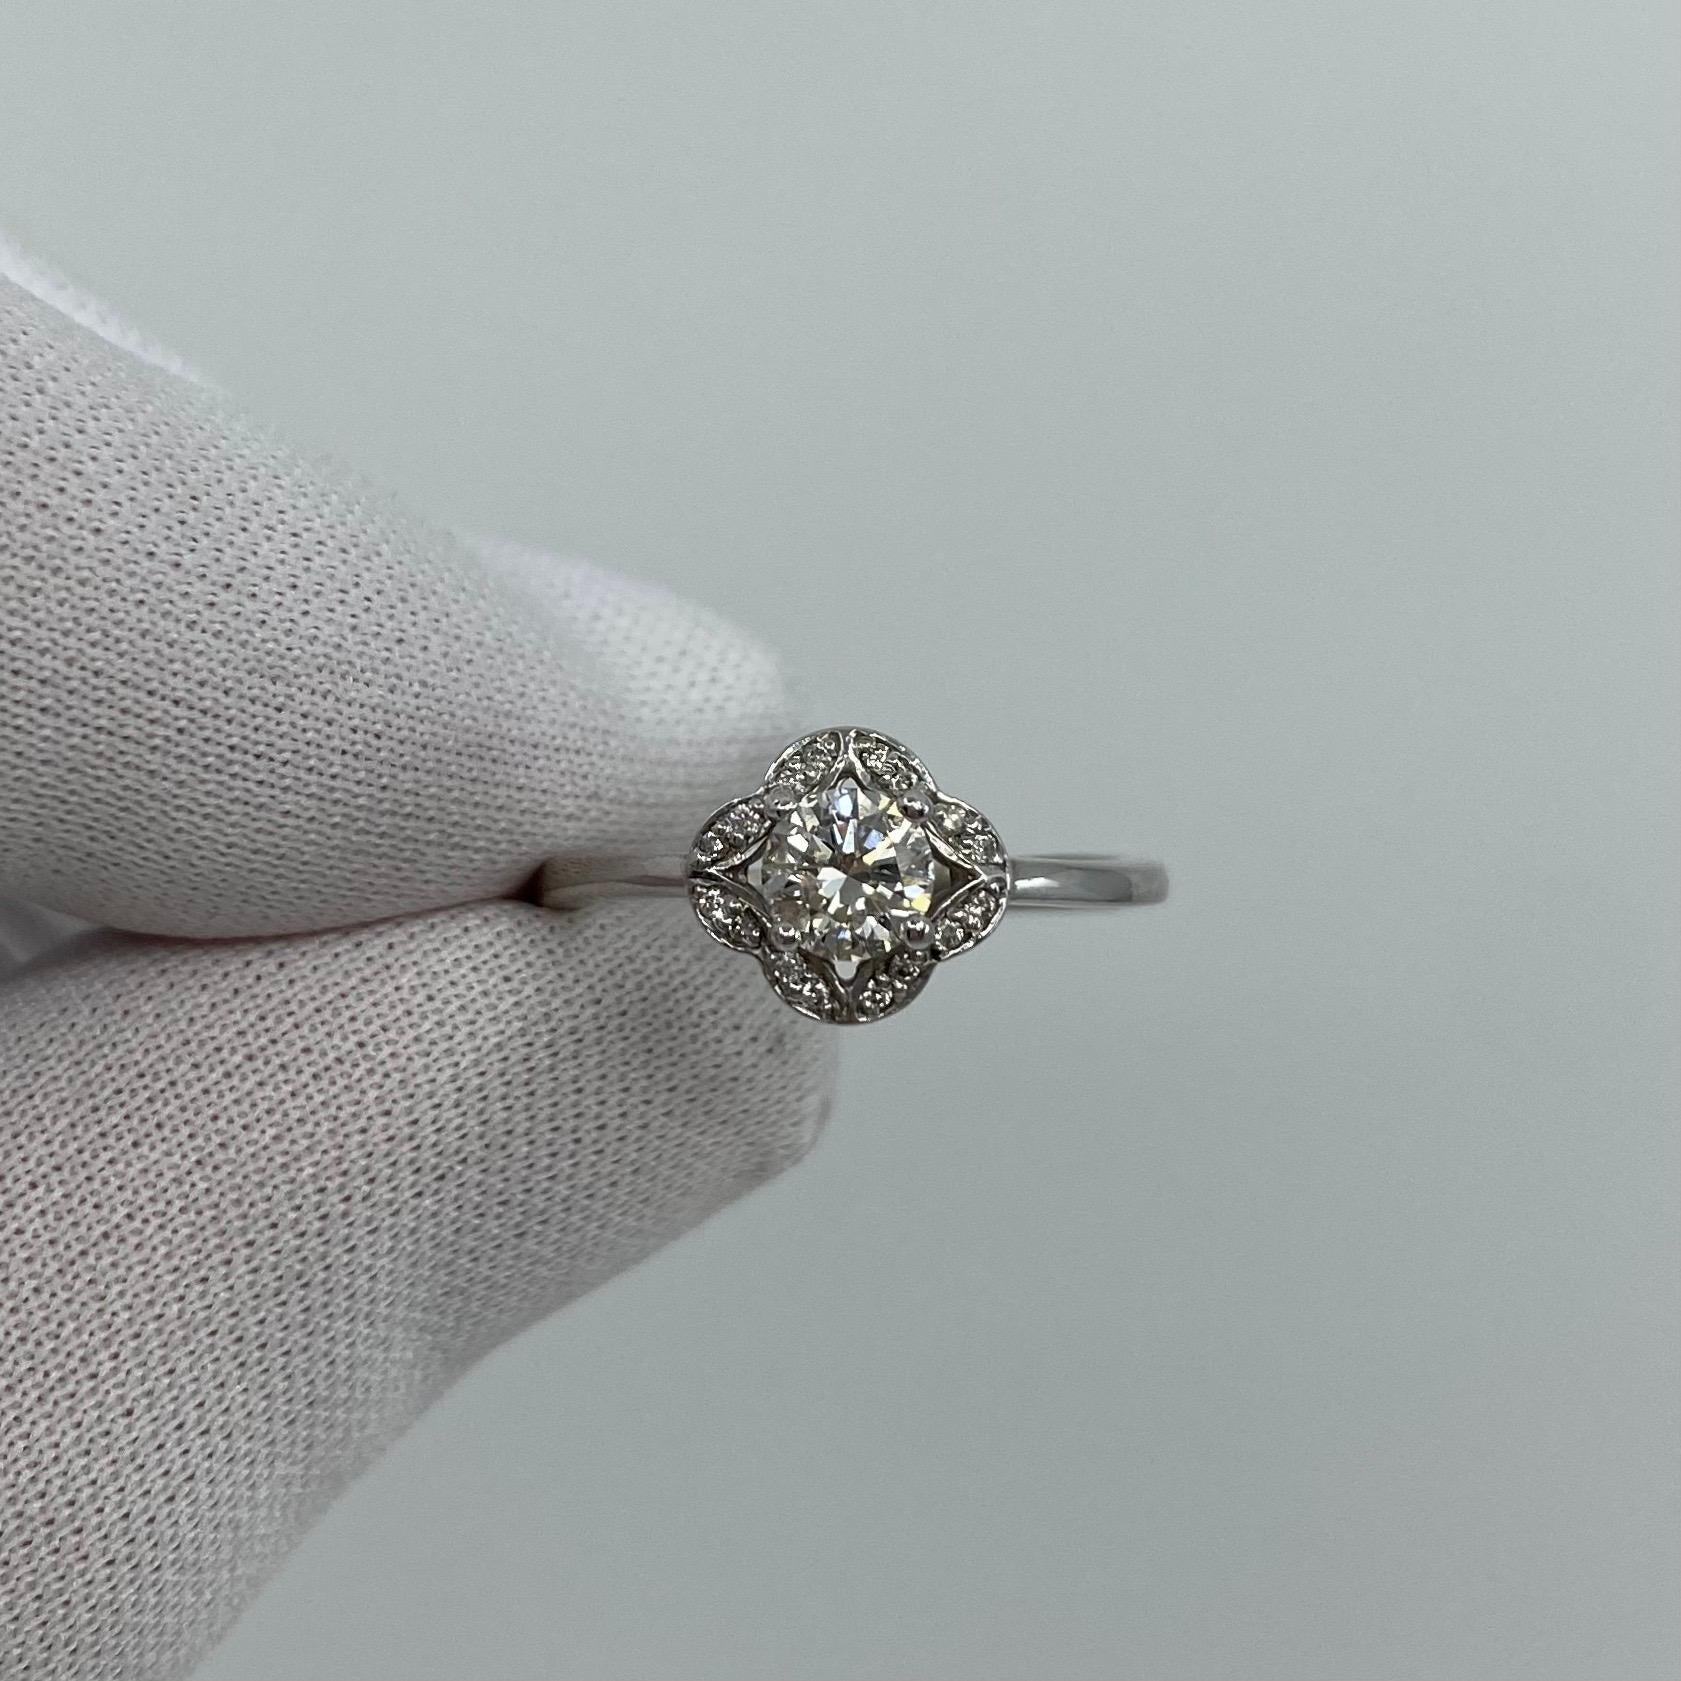 Round White Diamond 18k White Gold Halo Ring.

A beautiful 18 Karat white gold diamond halo ring with pave-set diamonds around the centre stone.
0.40 Carat centre diamond. GIA Certified with VS2 clarity and F colour, also has a very good round